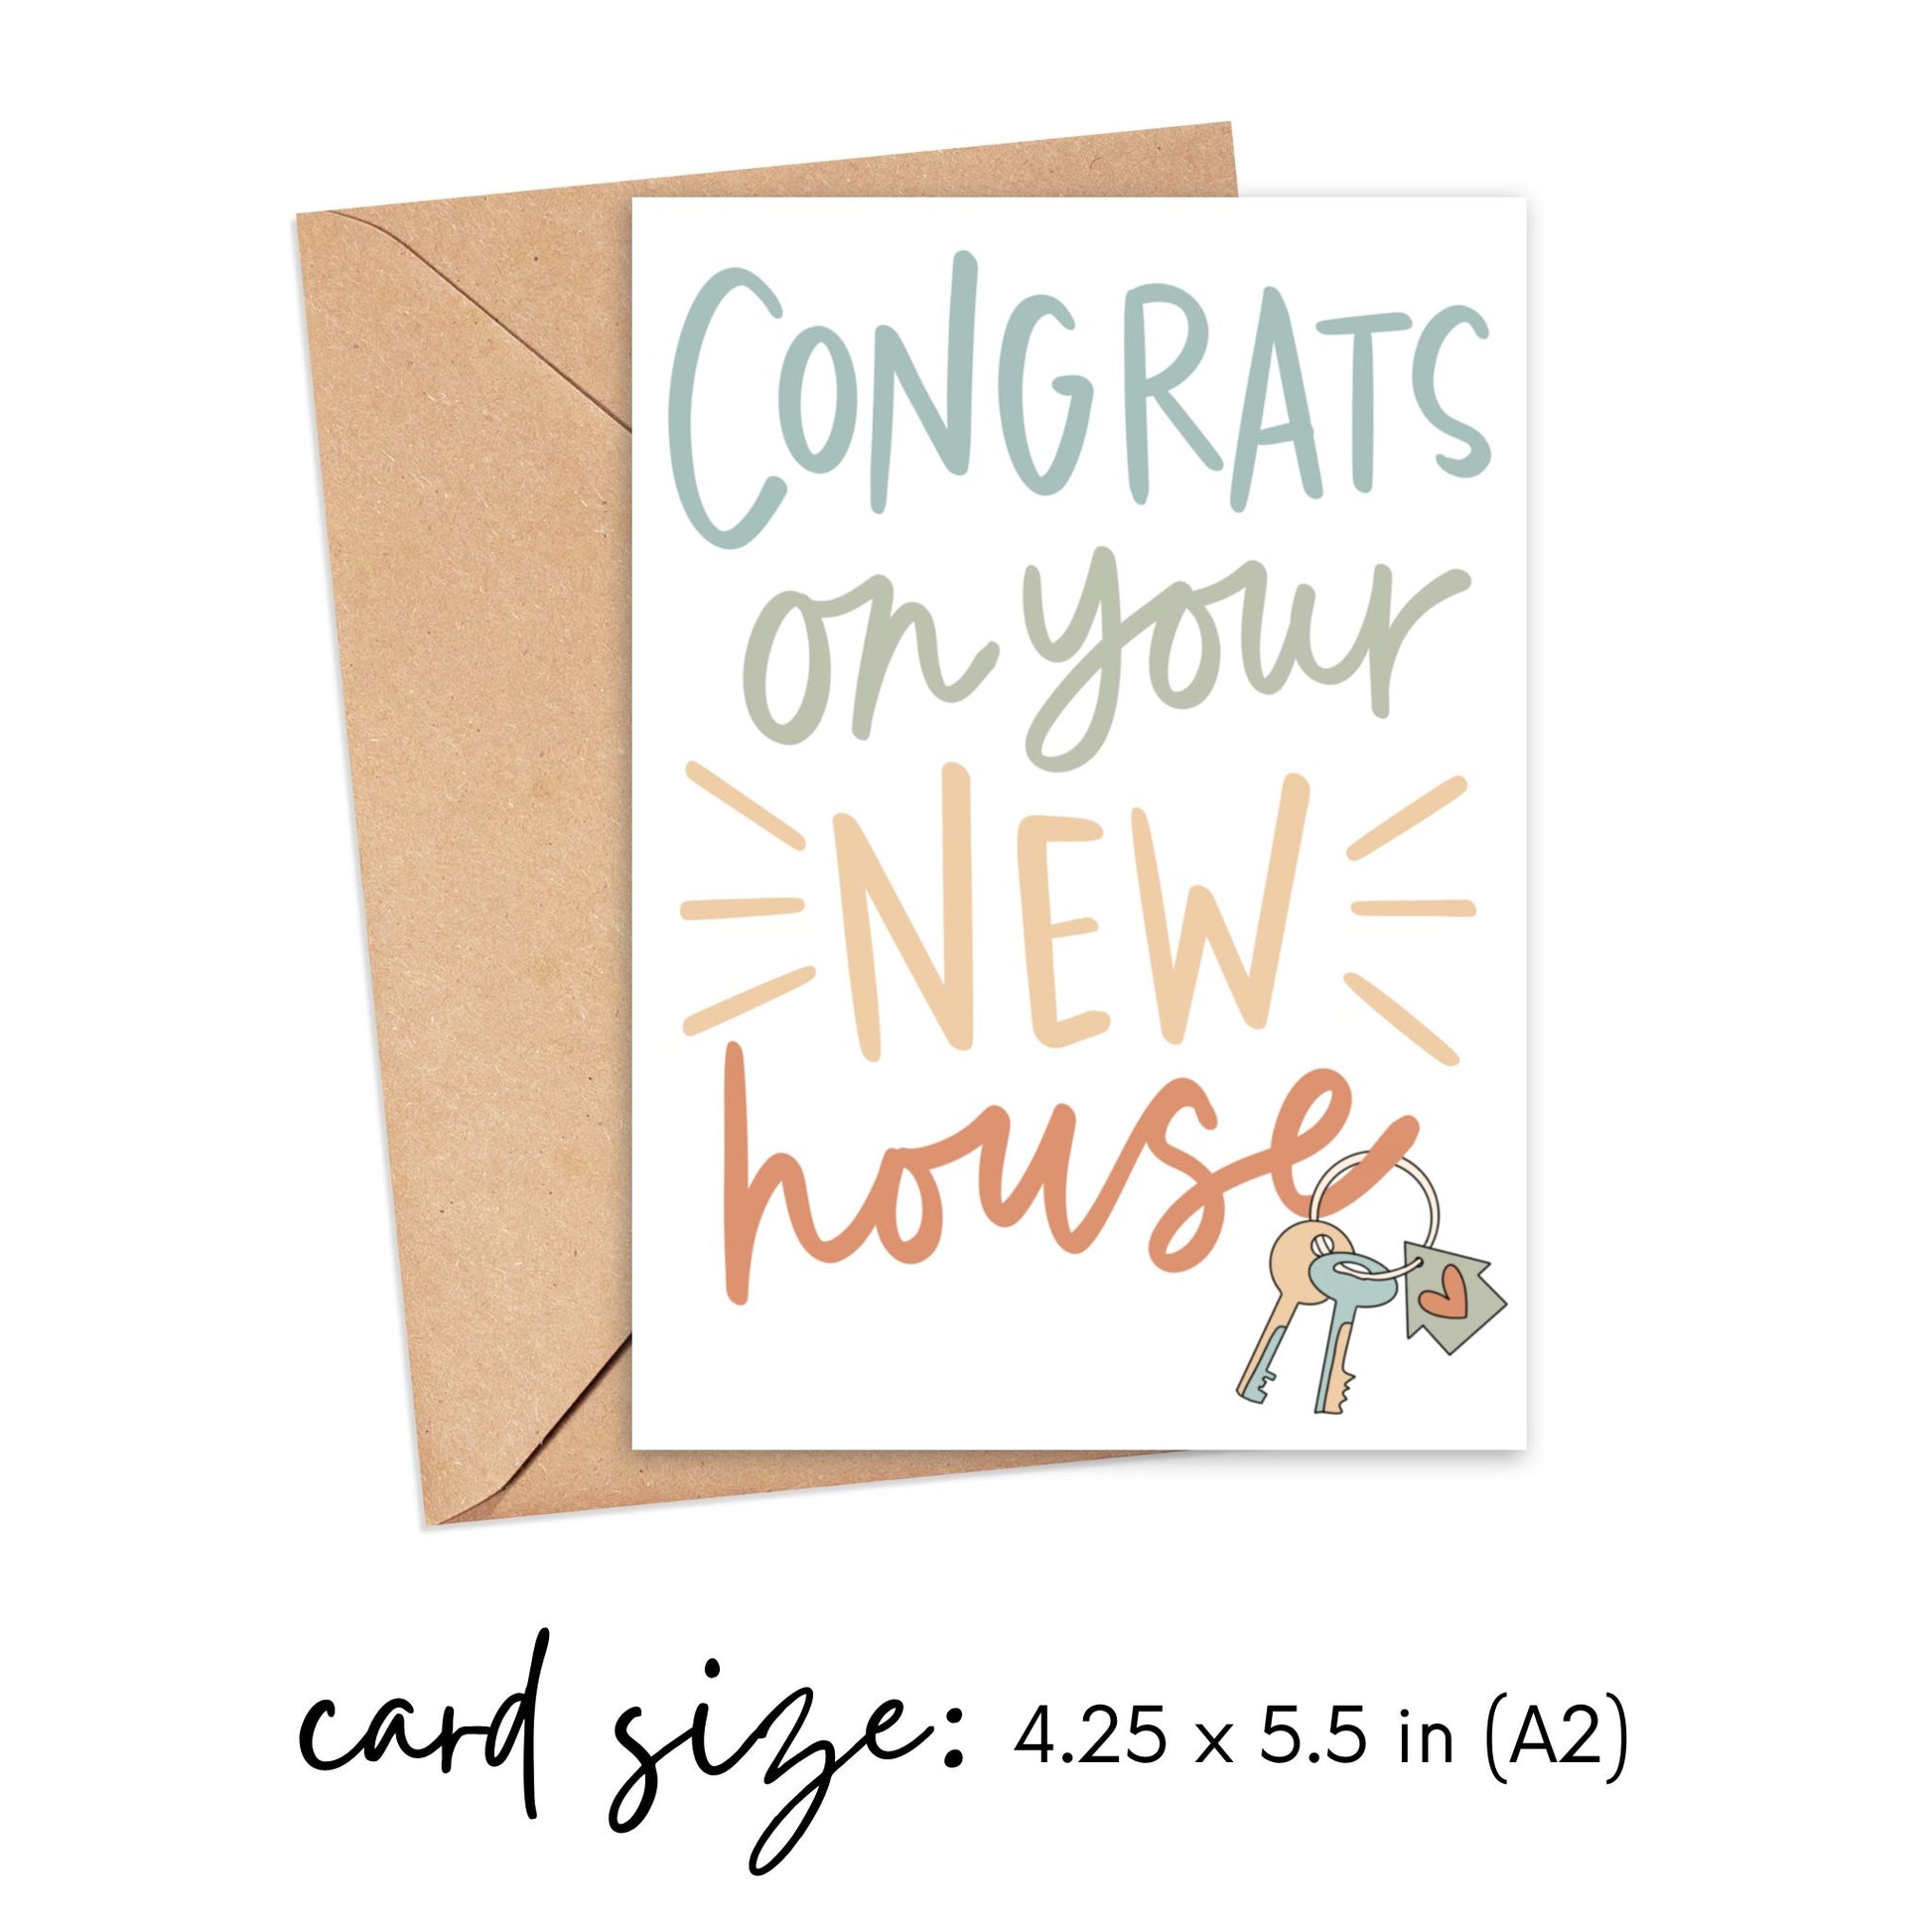 Congrats New House with Keys Card Simply Happy Cards